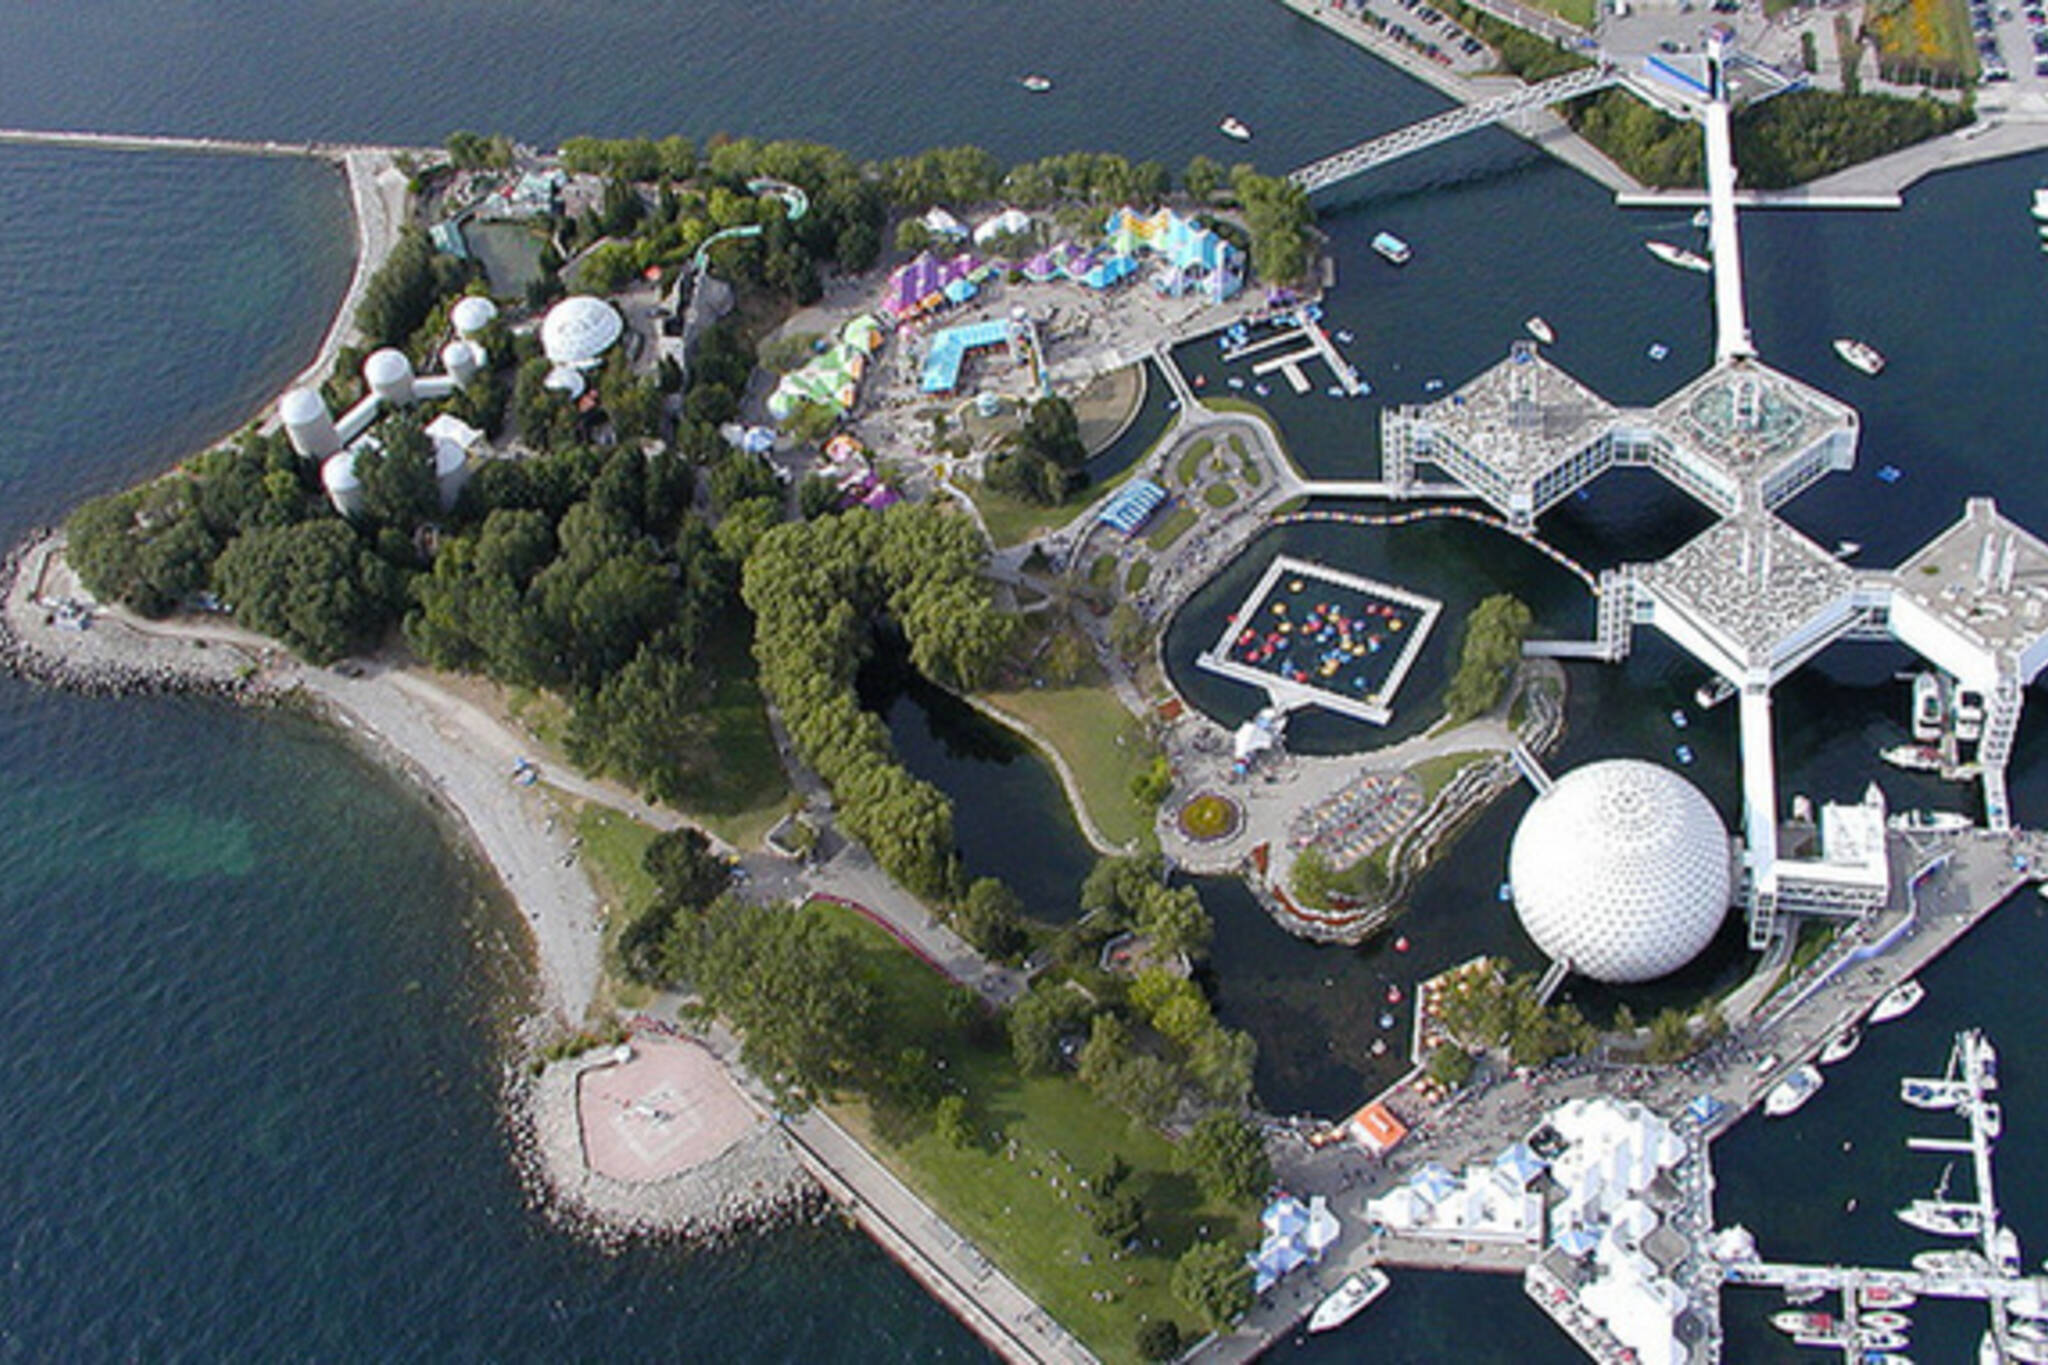 Ontario Place Revitalization